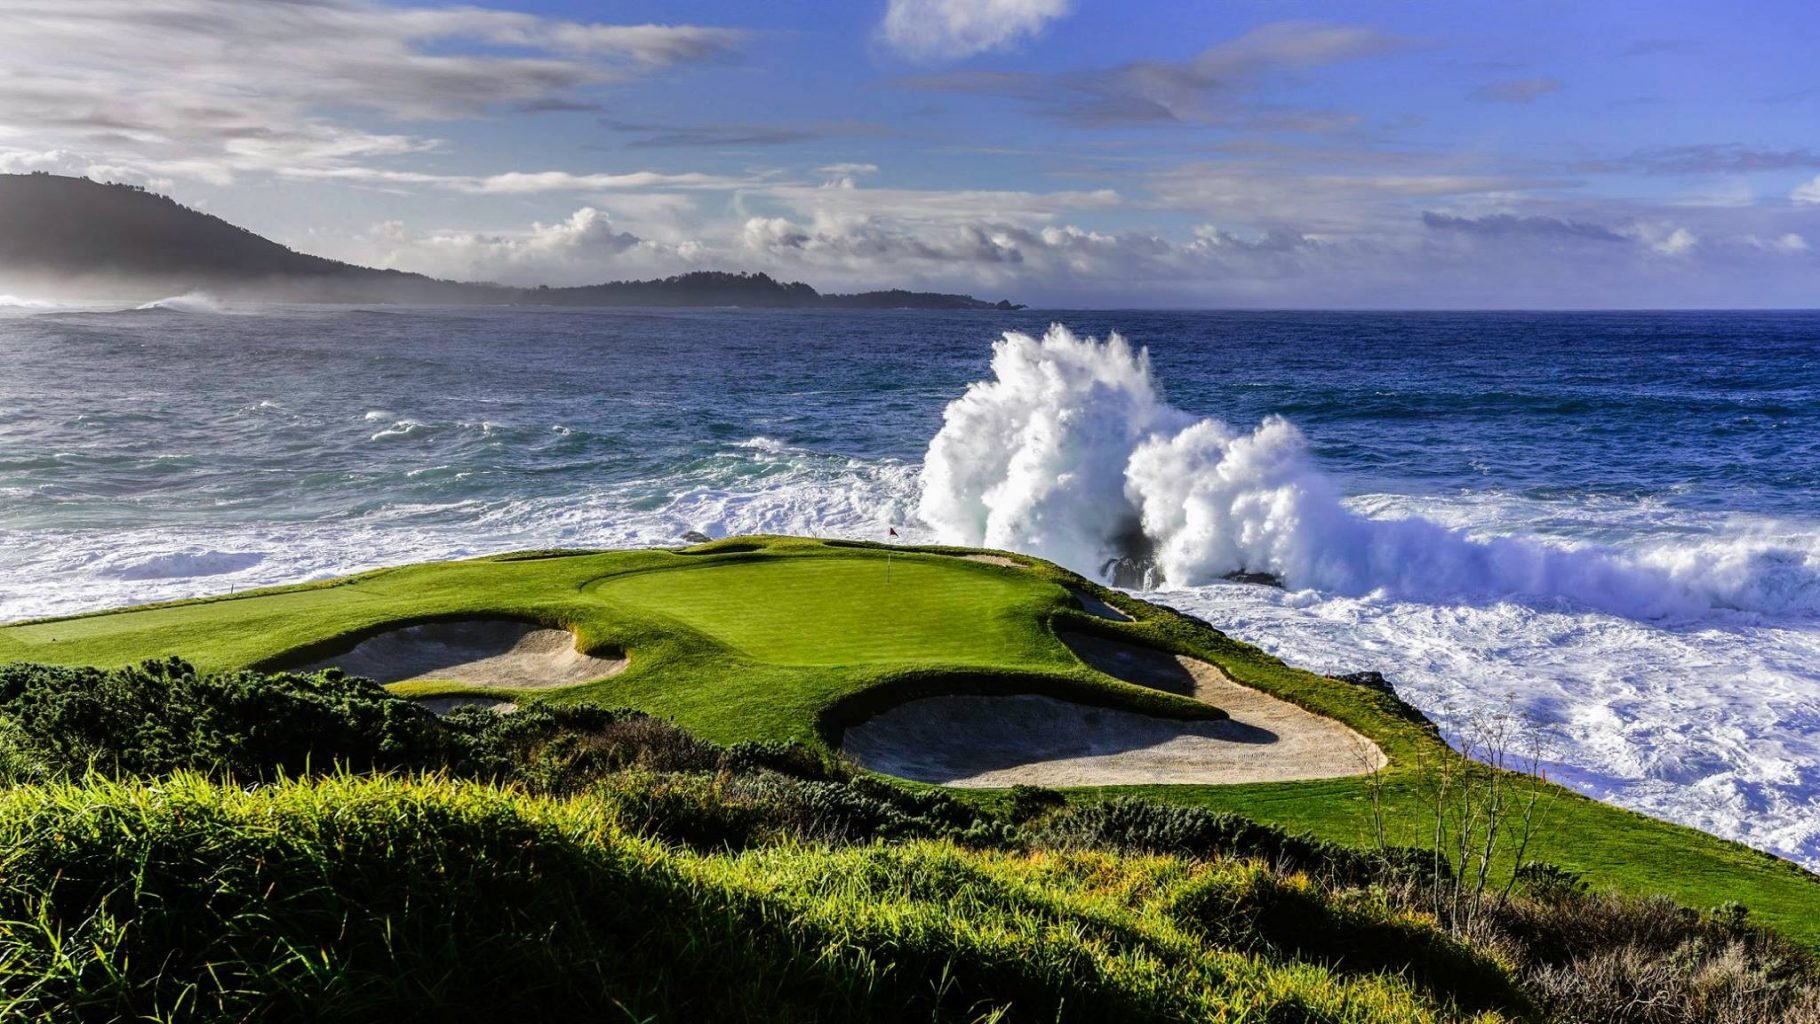 The 7th Hole at Pebble Beach: From Unfit to Unforgettable